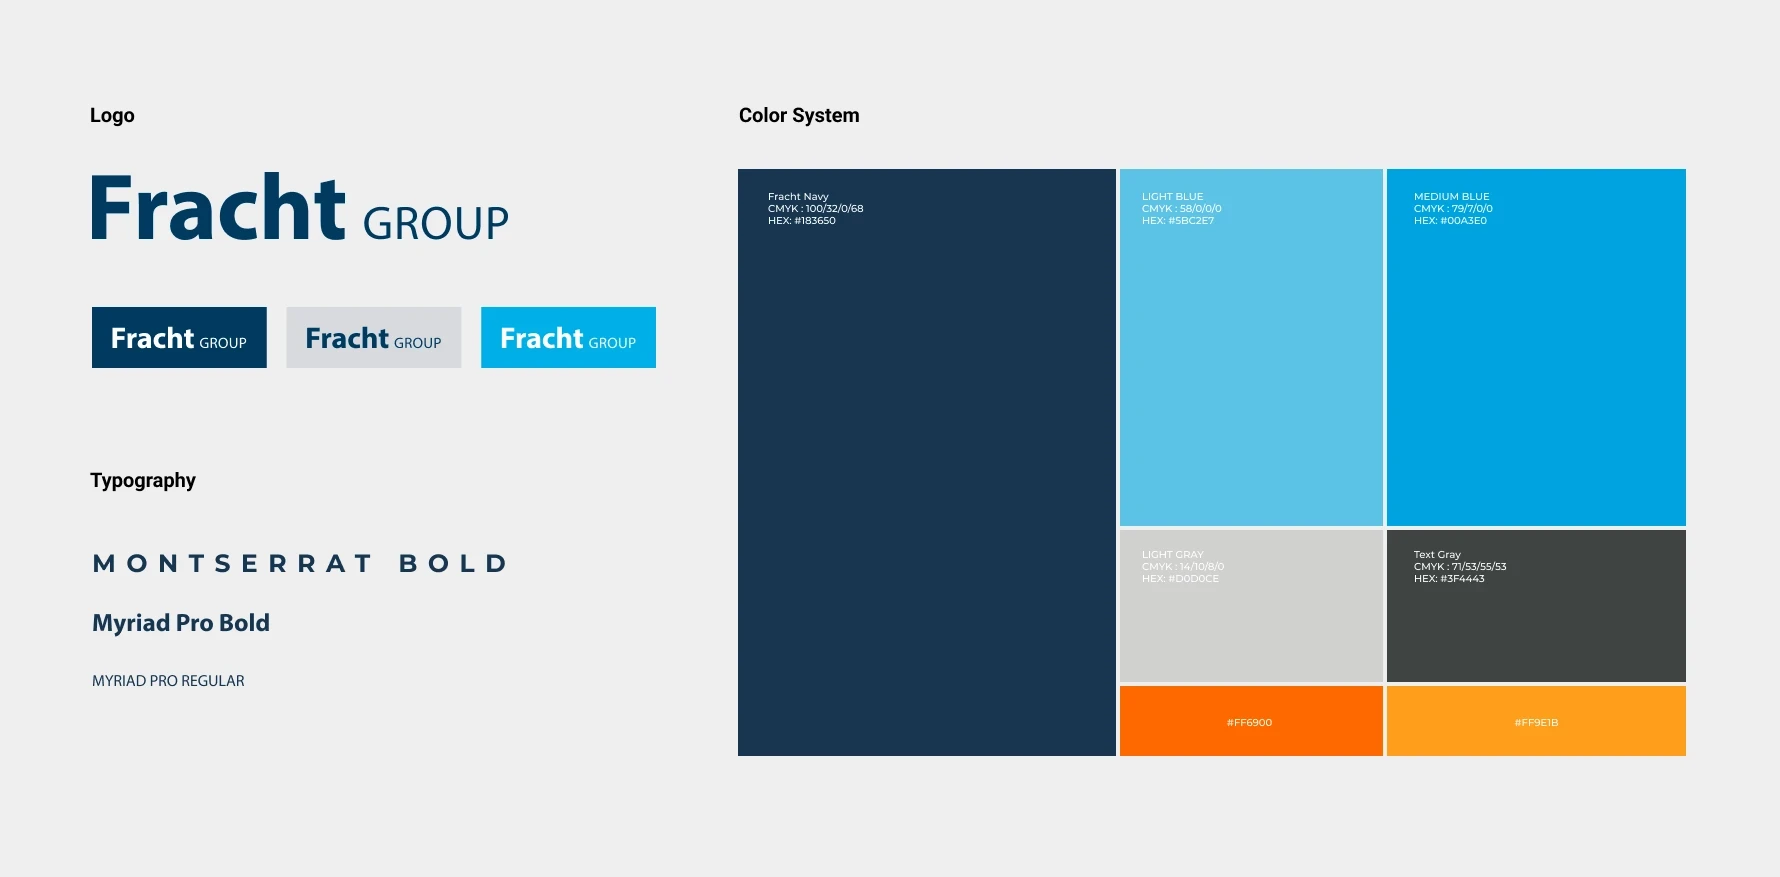 Organized layout of Fracht Group branding elements, including the Fracht Group logo, typography choices and color system used.